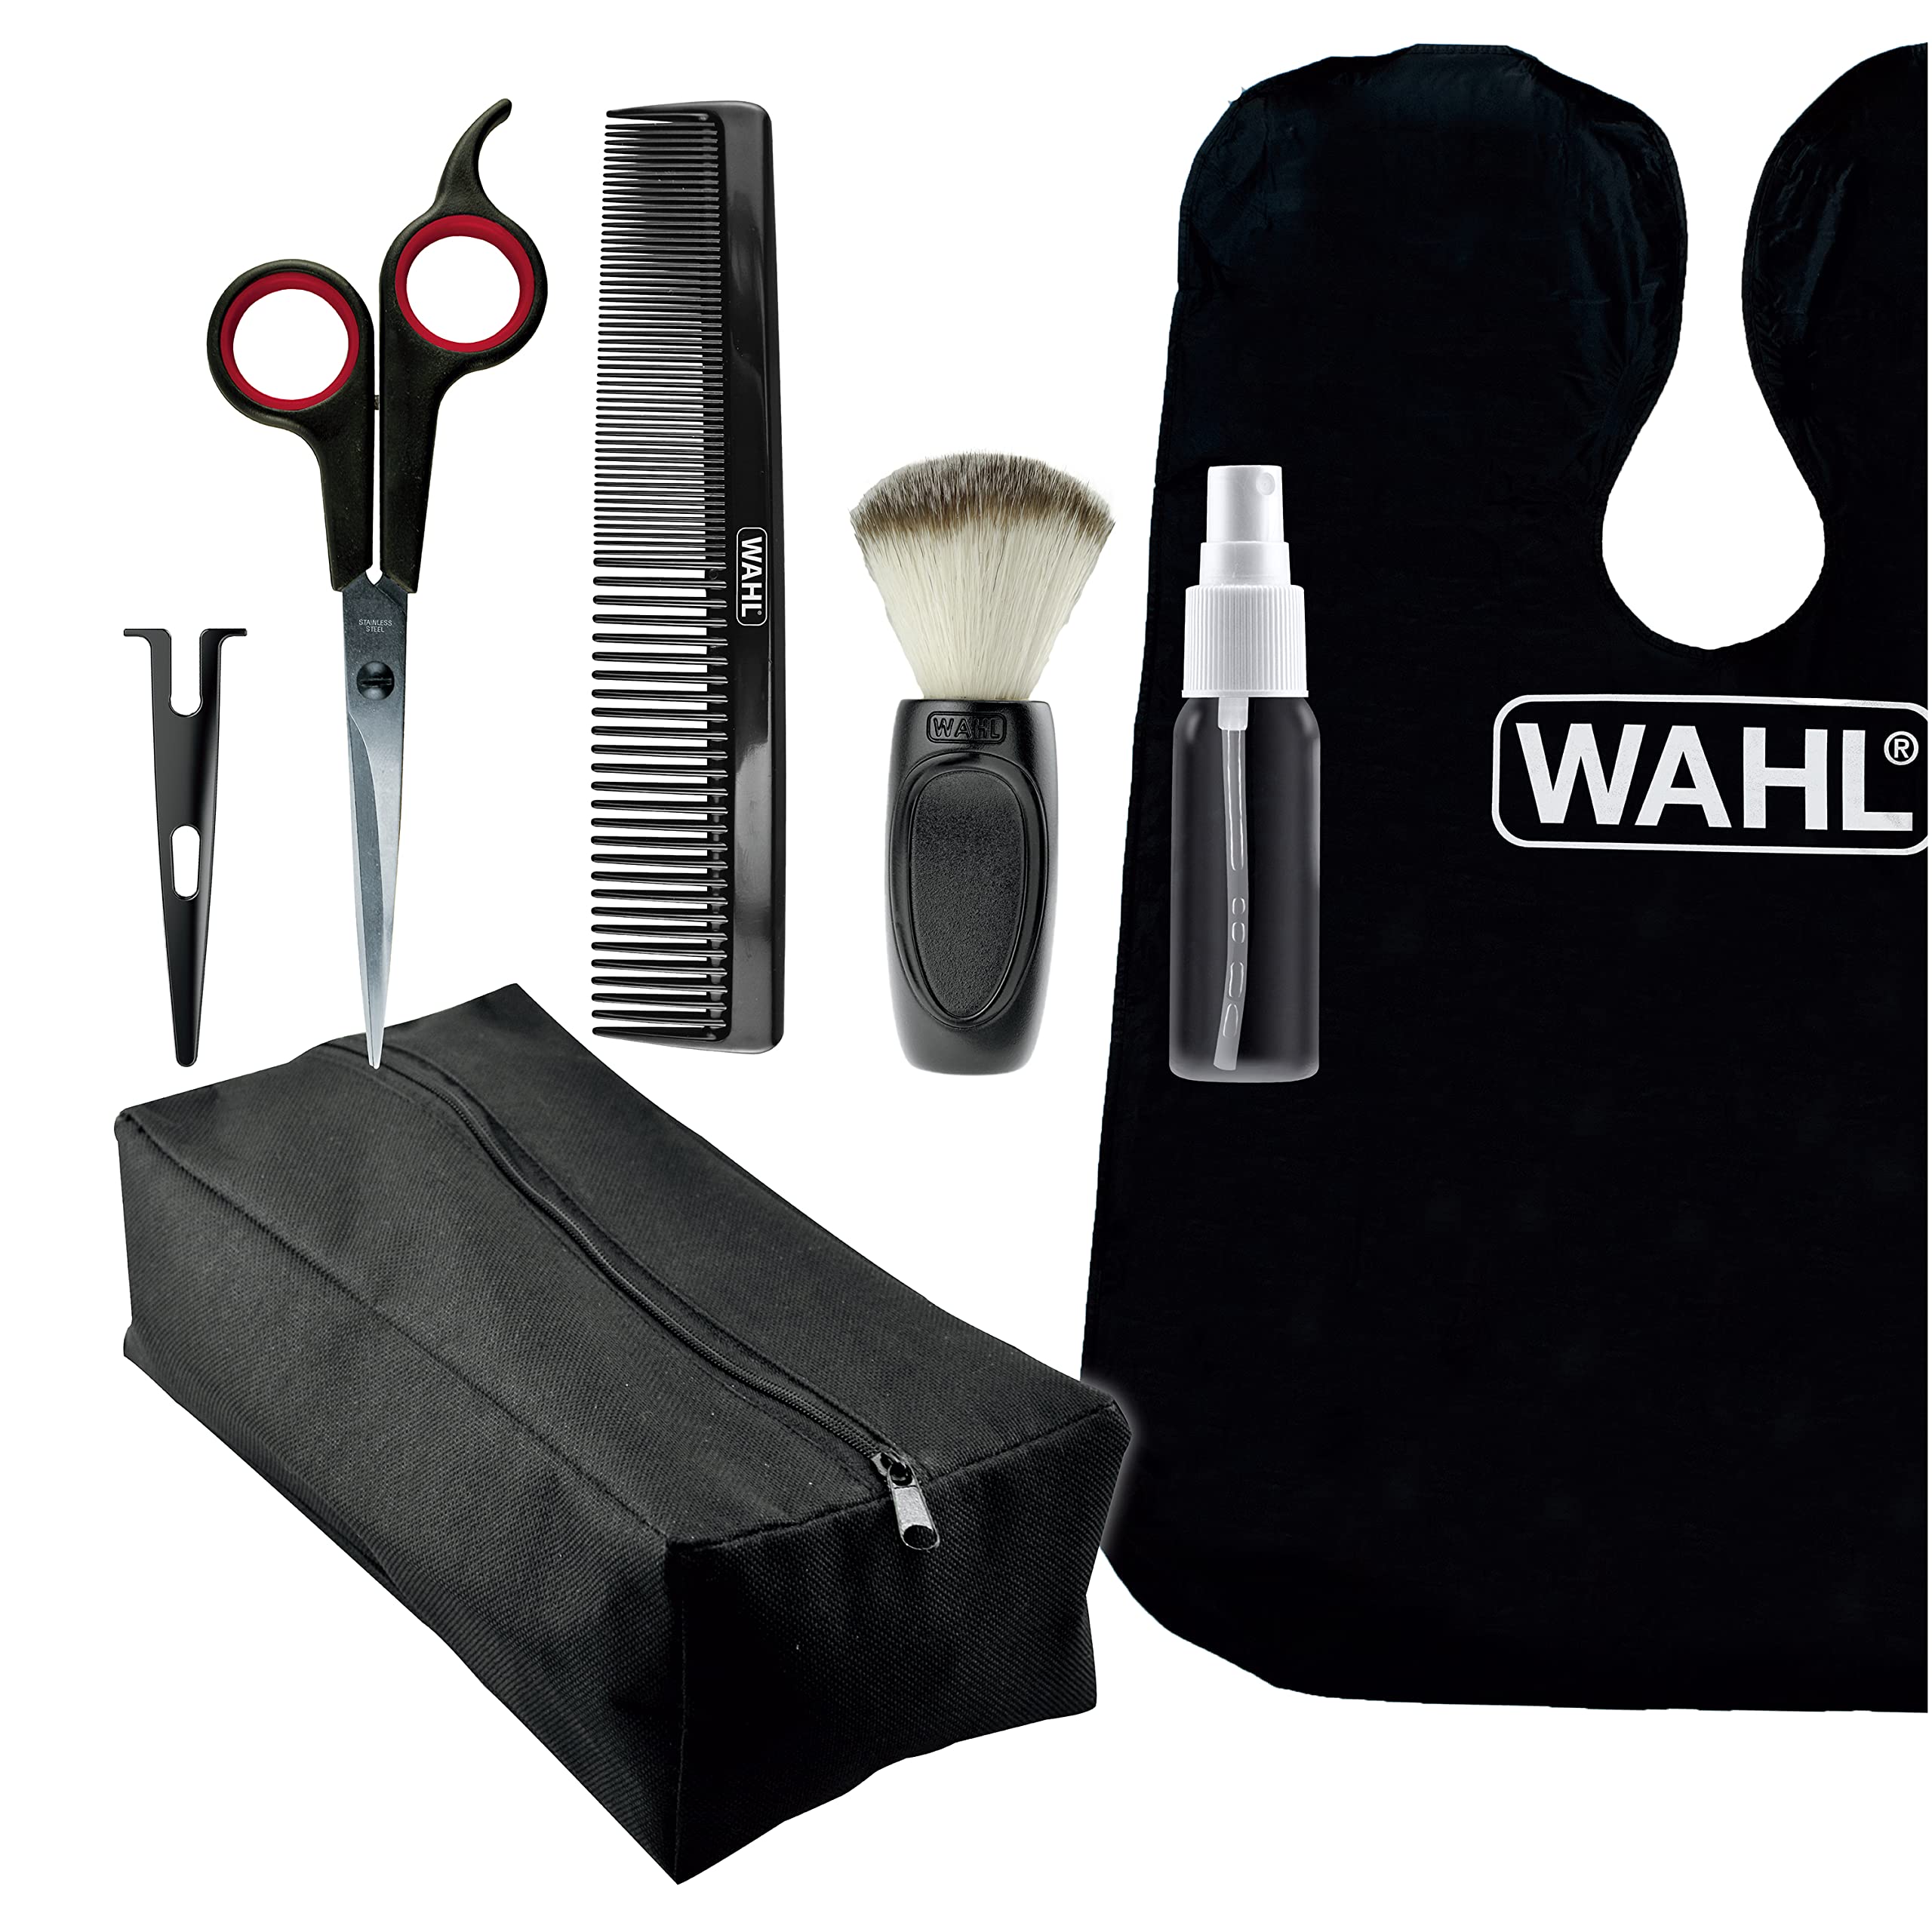 Wahl Home Haircutting Kit Essentials Featuring Barbers Haircutting Cape, Styling Comb, Scissors with Blade Guard, Neck Duster, Spray Bottle, & Soft Pouch Case – Model 03599